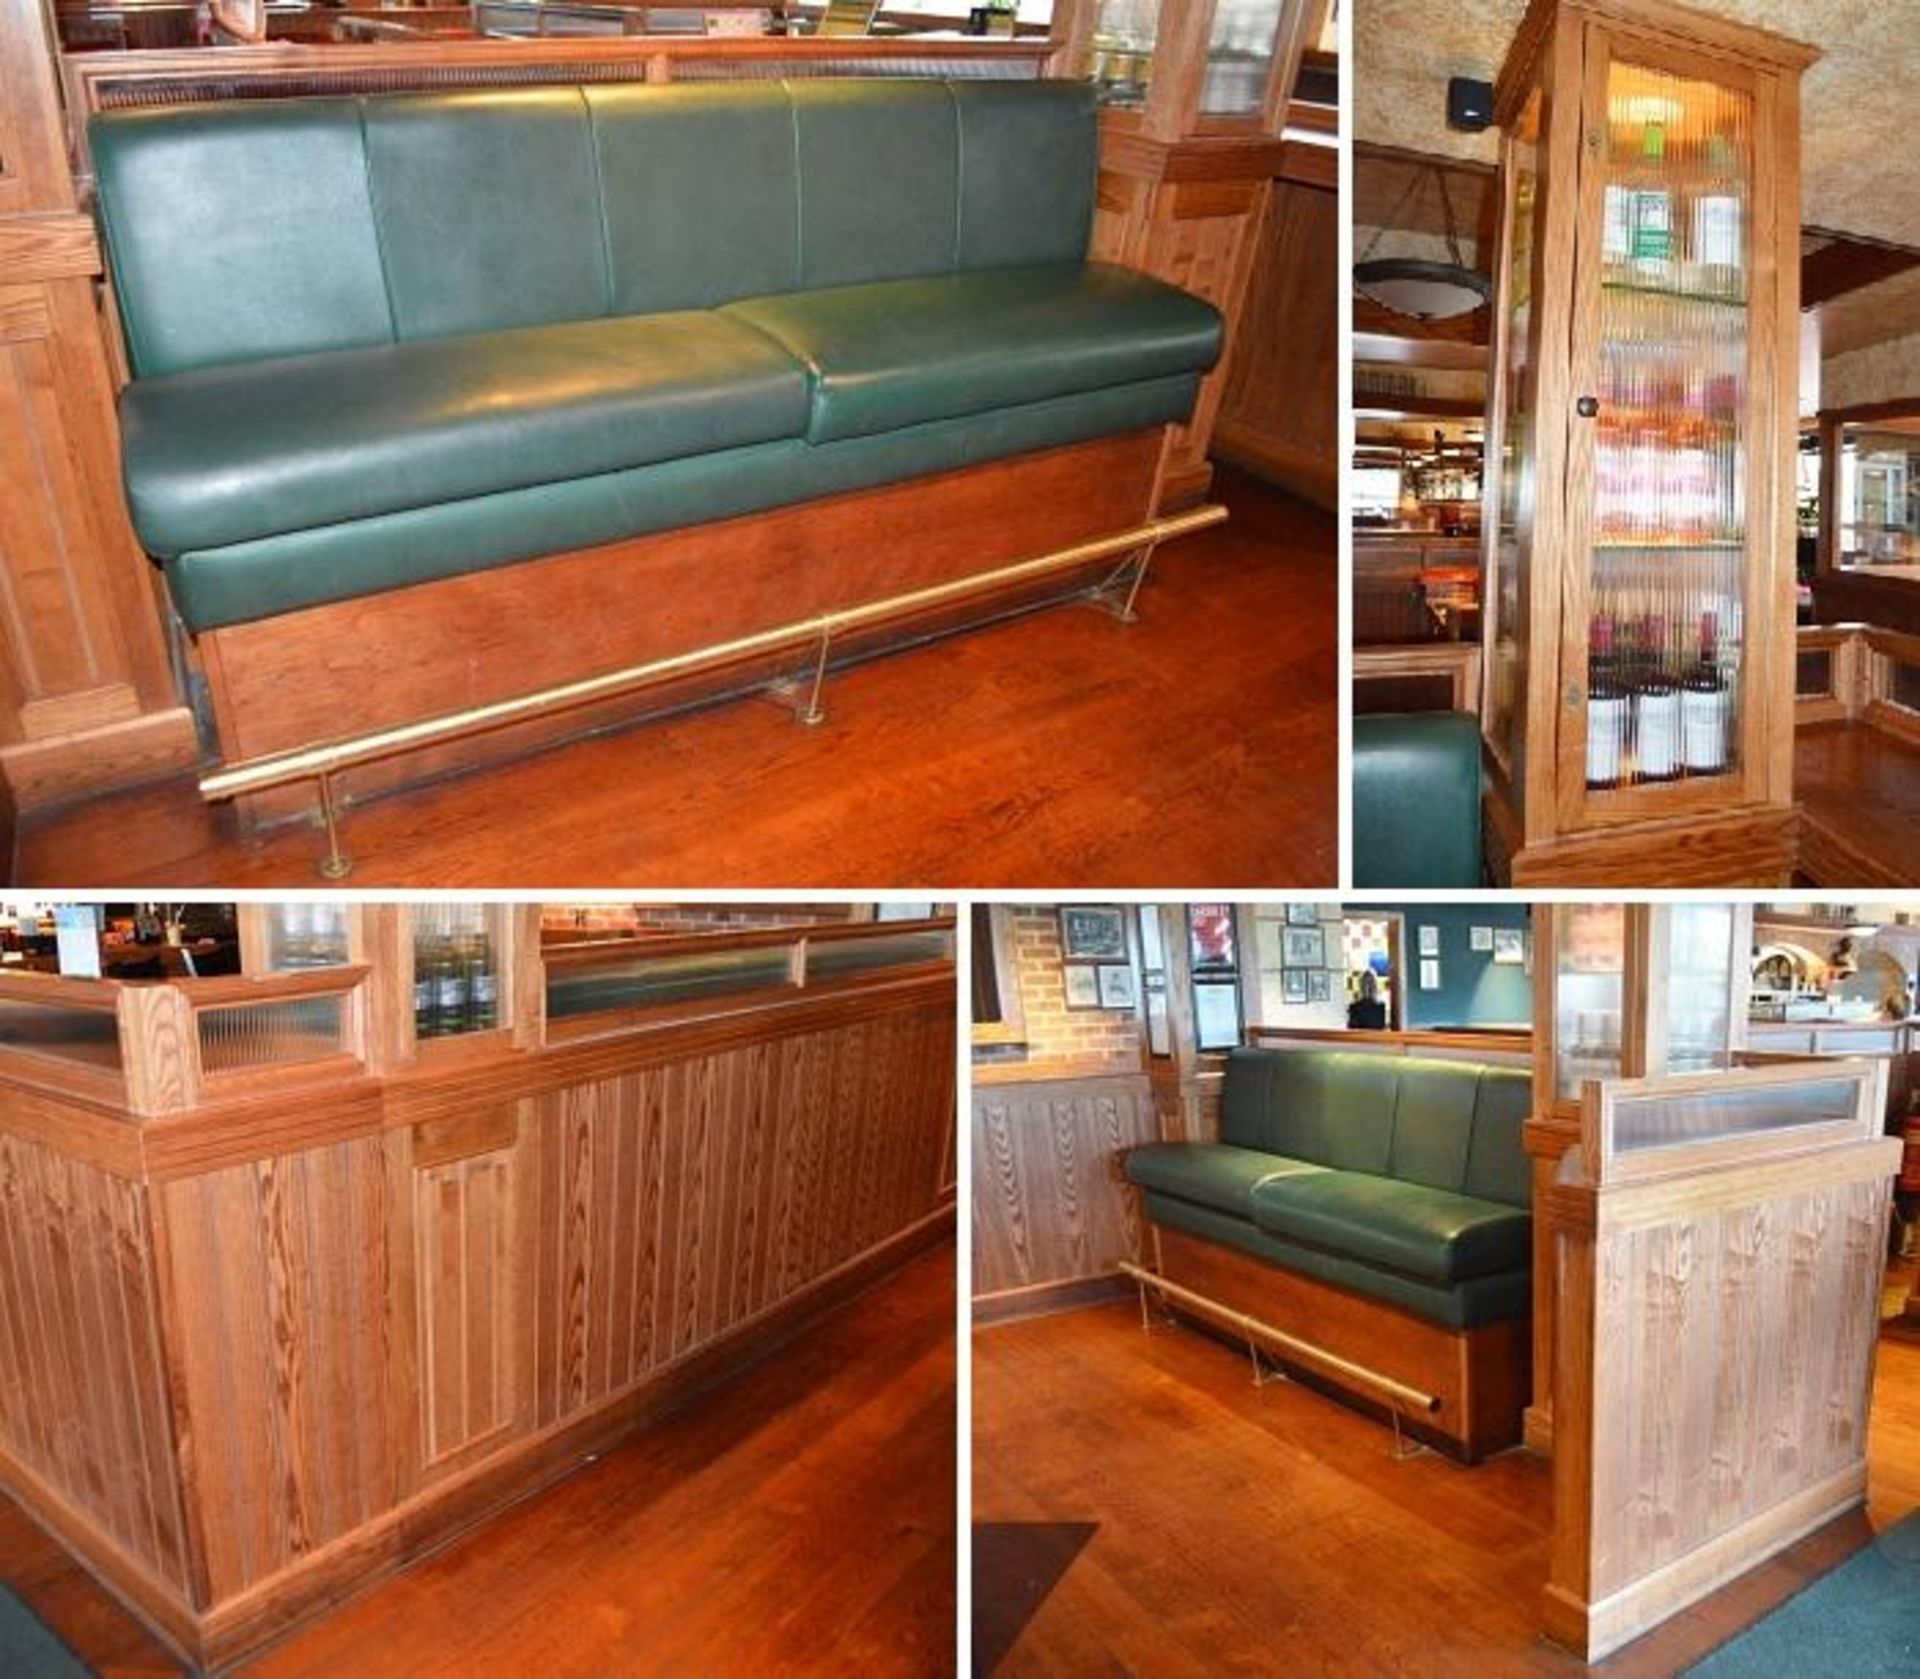 1 x Bar Restaurant Room Partition With Seating Bench, Pillar, Wine Cabinet and Foot Rest - Overall S